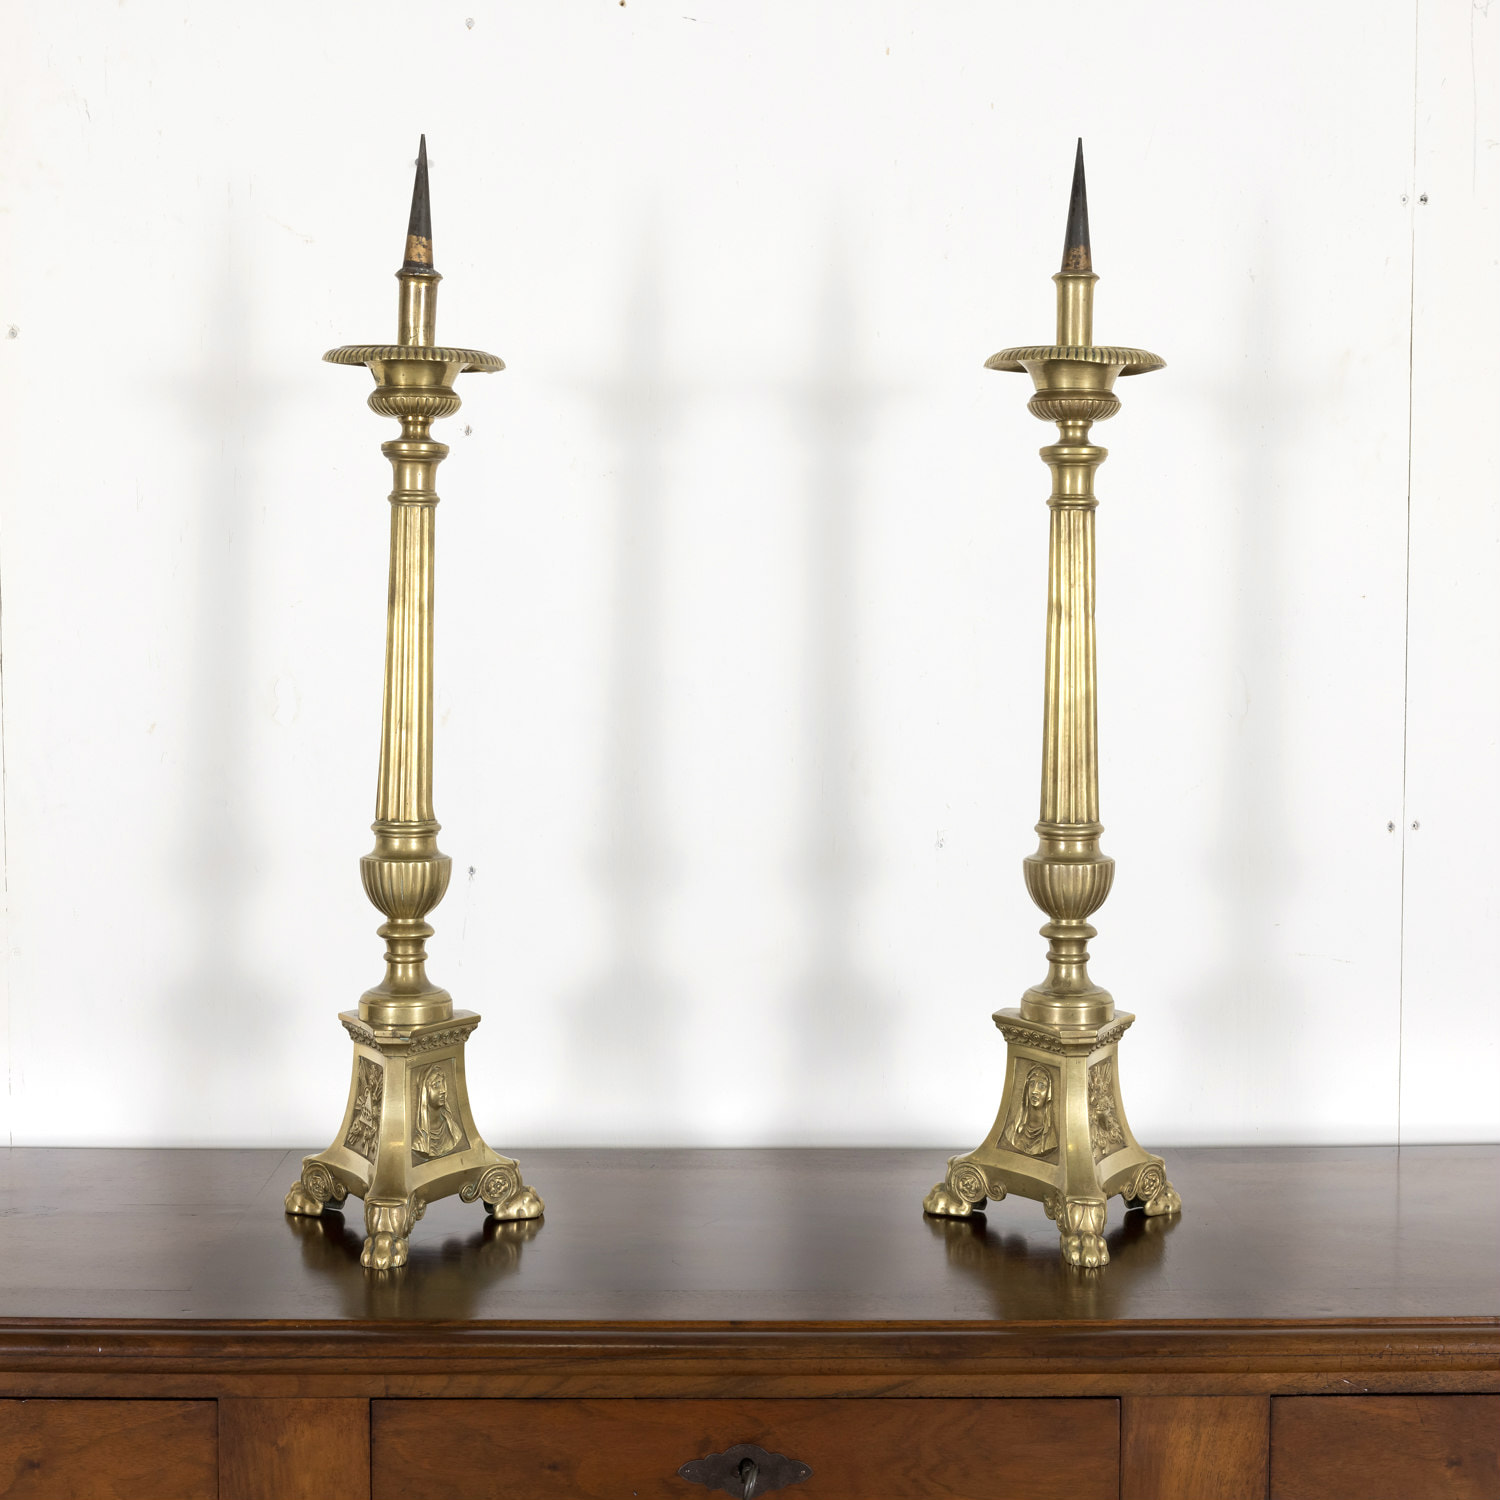 Lot - A pair of gilt brass pricket candlesticks, French, 19th century